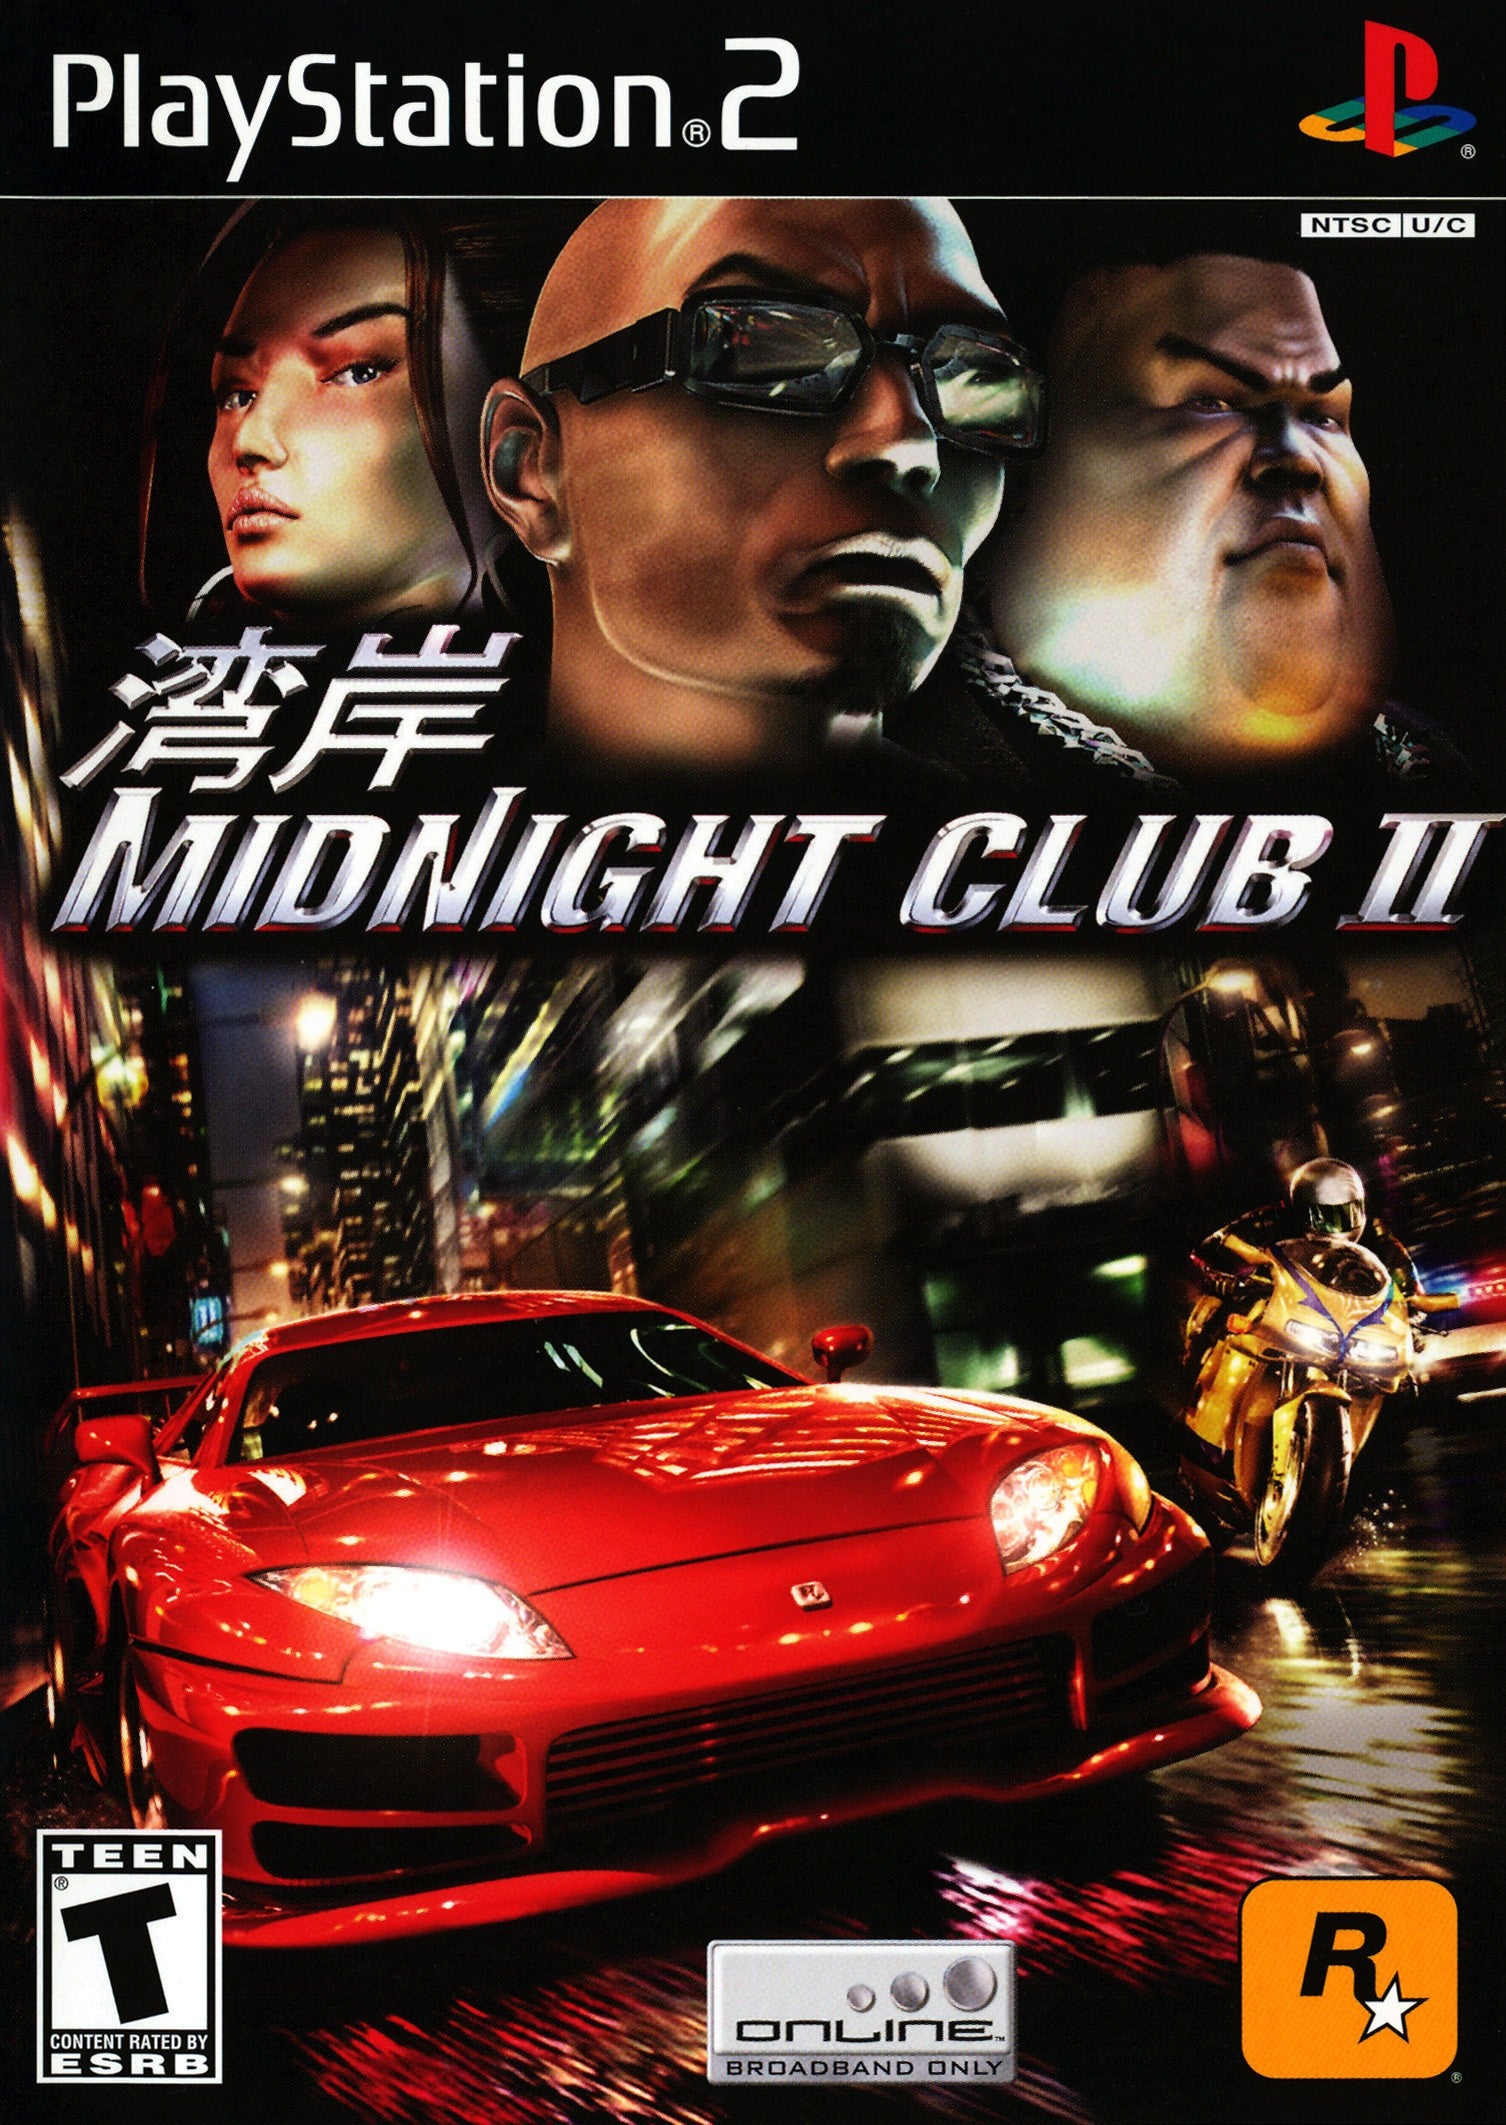 Midnight Club II - PlayStation 2 (PS2) Game - YourGamingShop.com - Buy, Sell, Trade Video Games Online. 120 Day Warranty. Satisfaction Guaranteed.